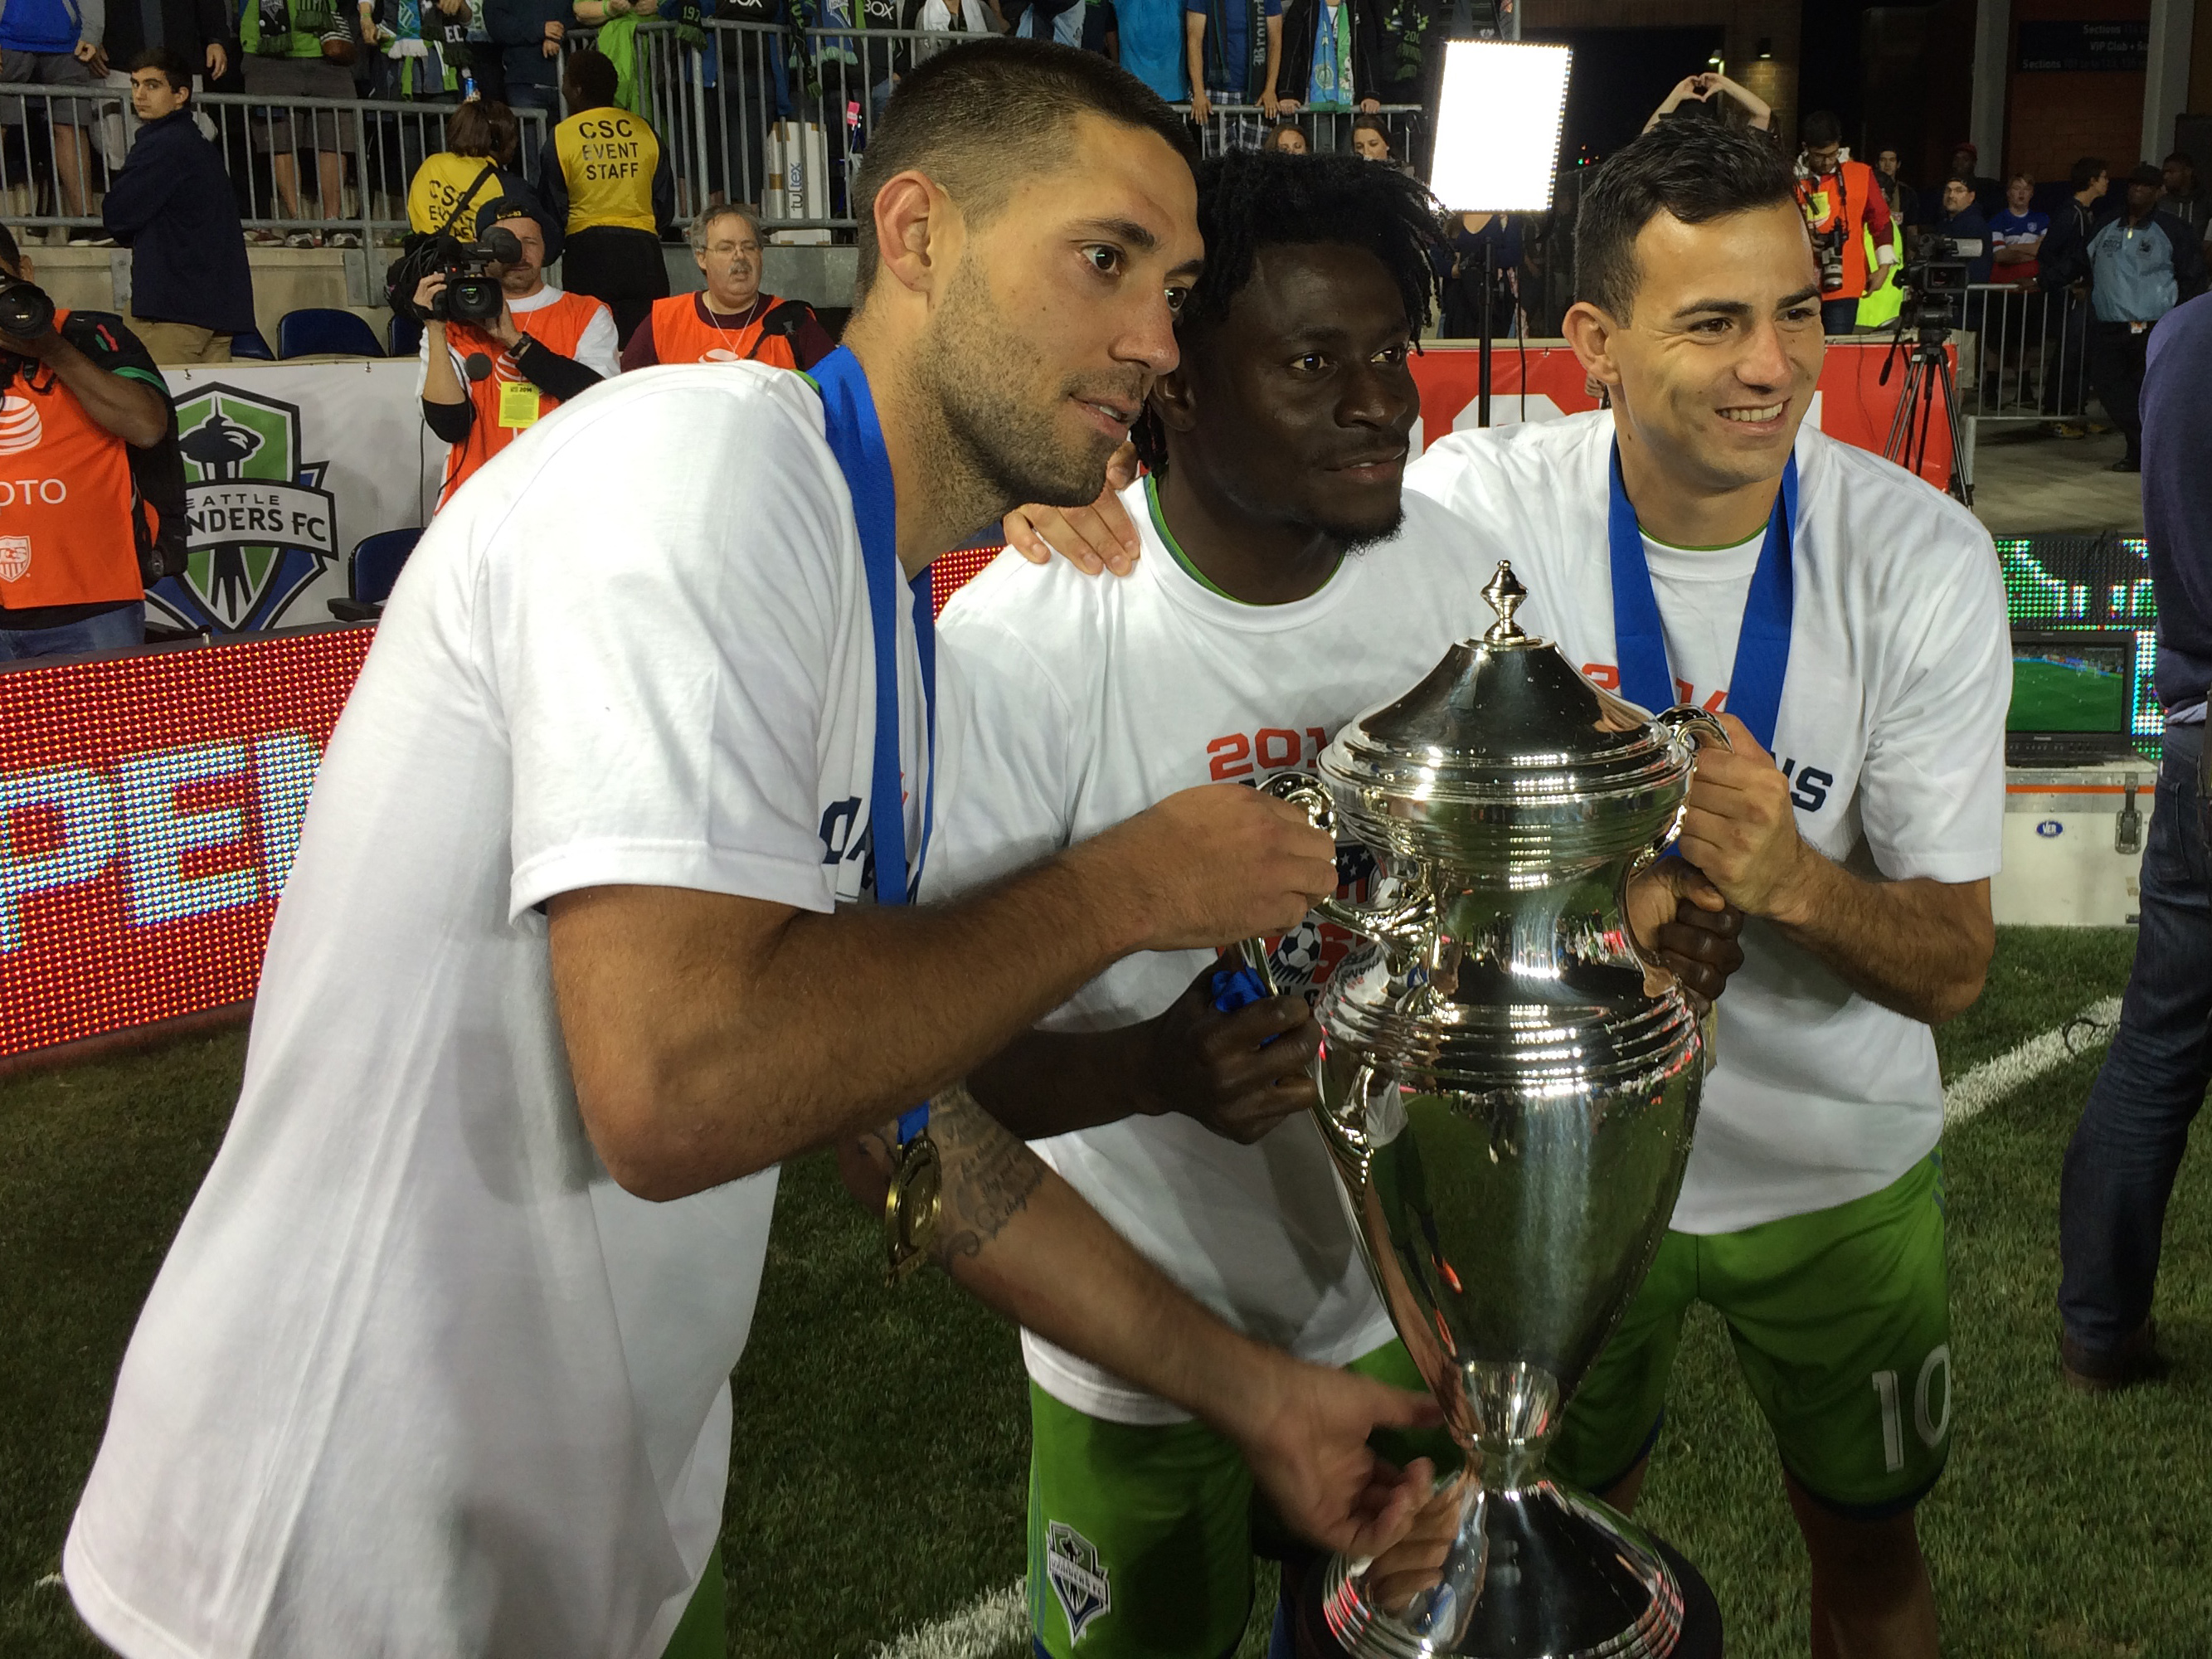 Clint Dempsey and the Seattle Sounders lifted the Cup in 2014.  